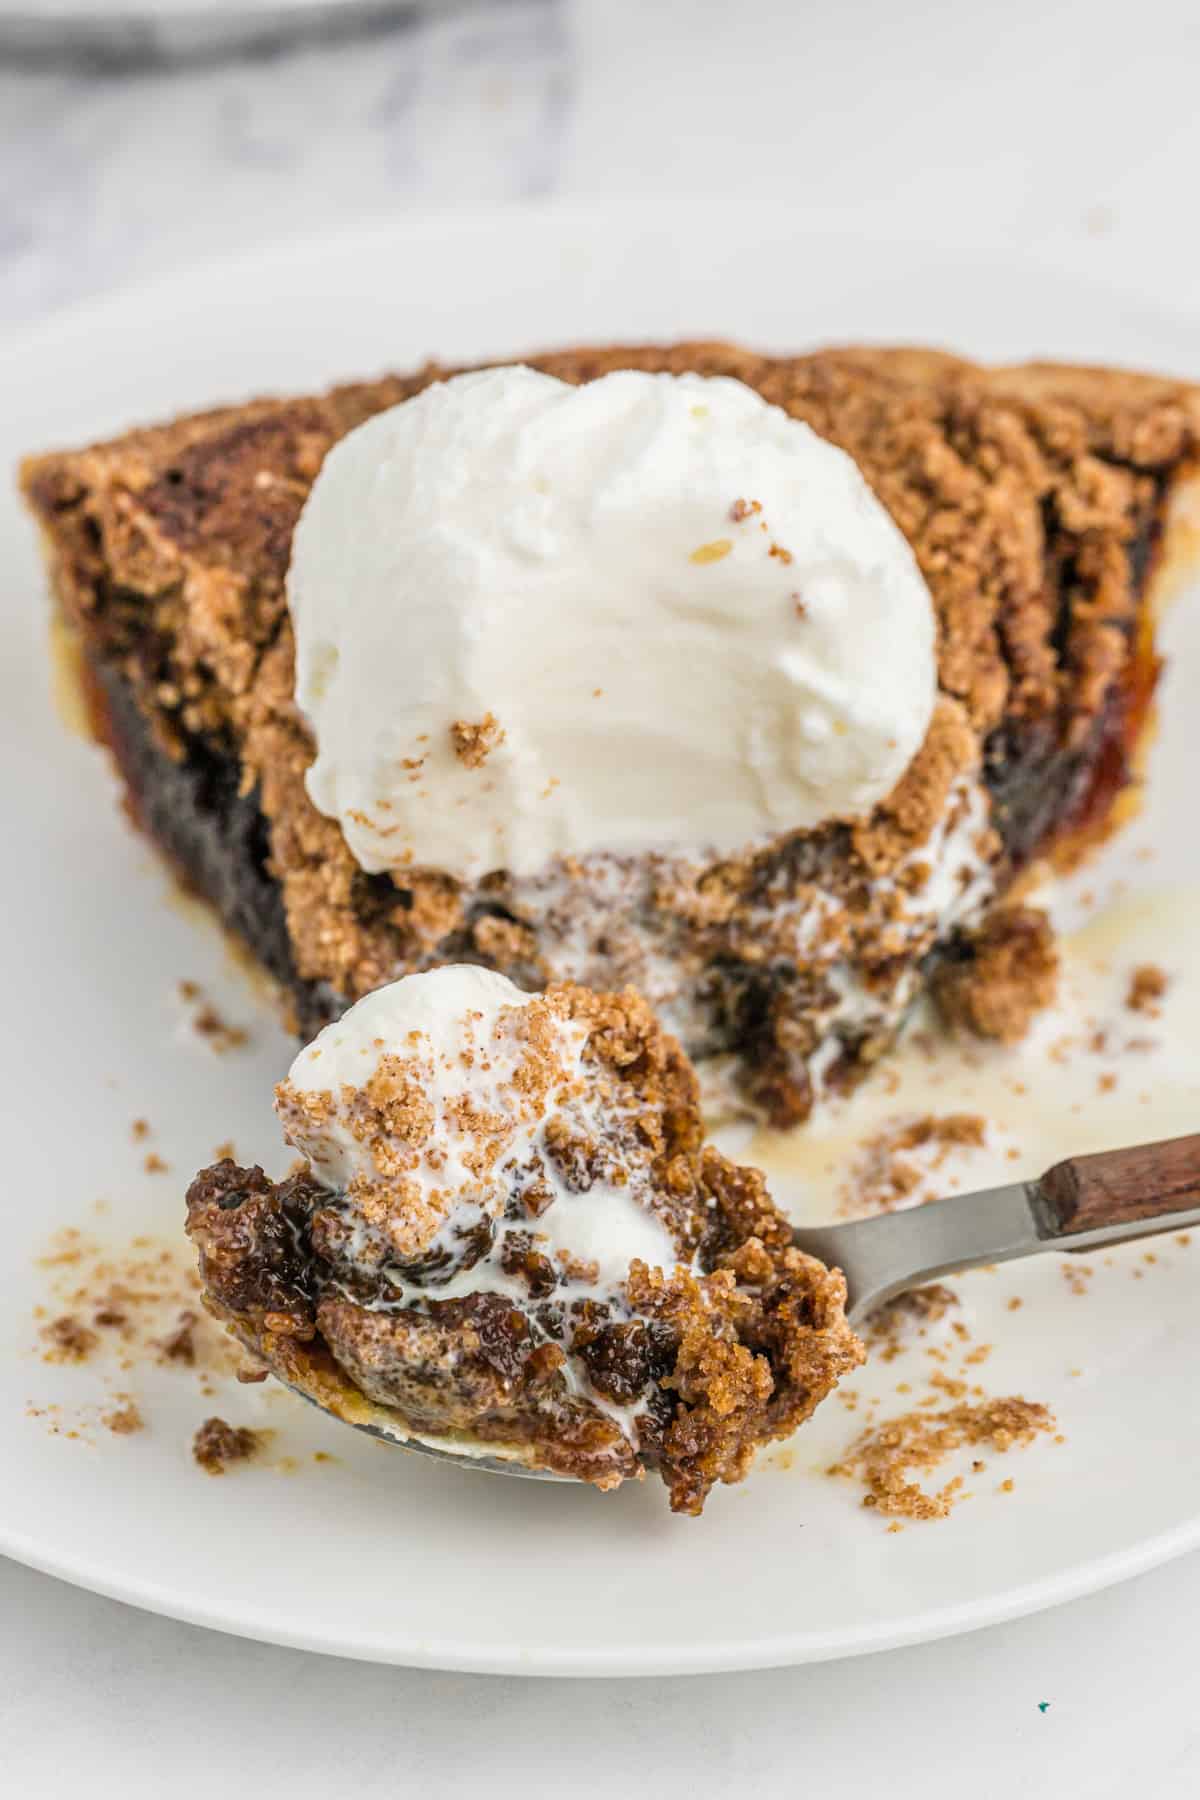 A spoon cutting into a slice of shoofly pie with vanilla ice cream on top.